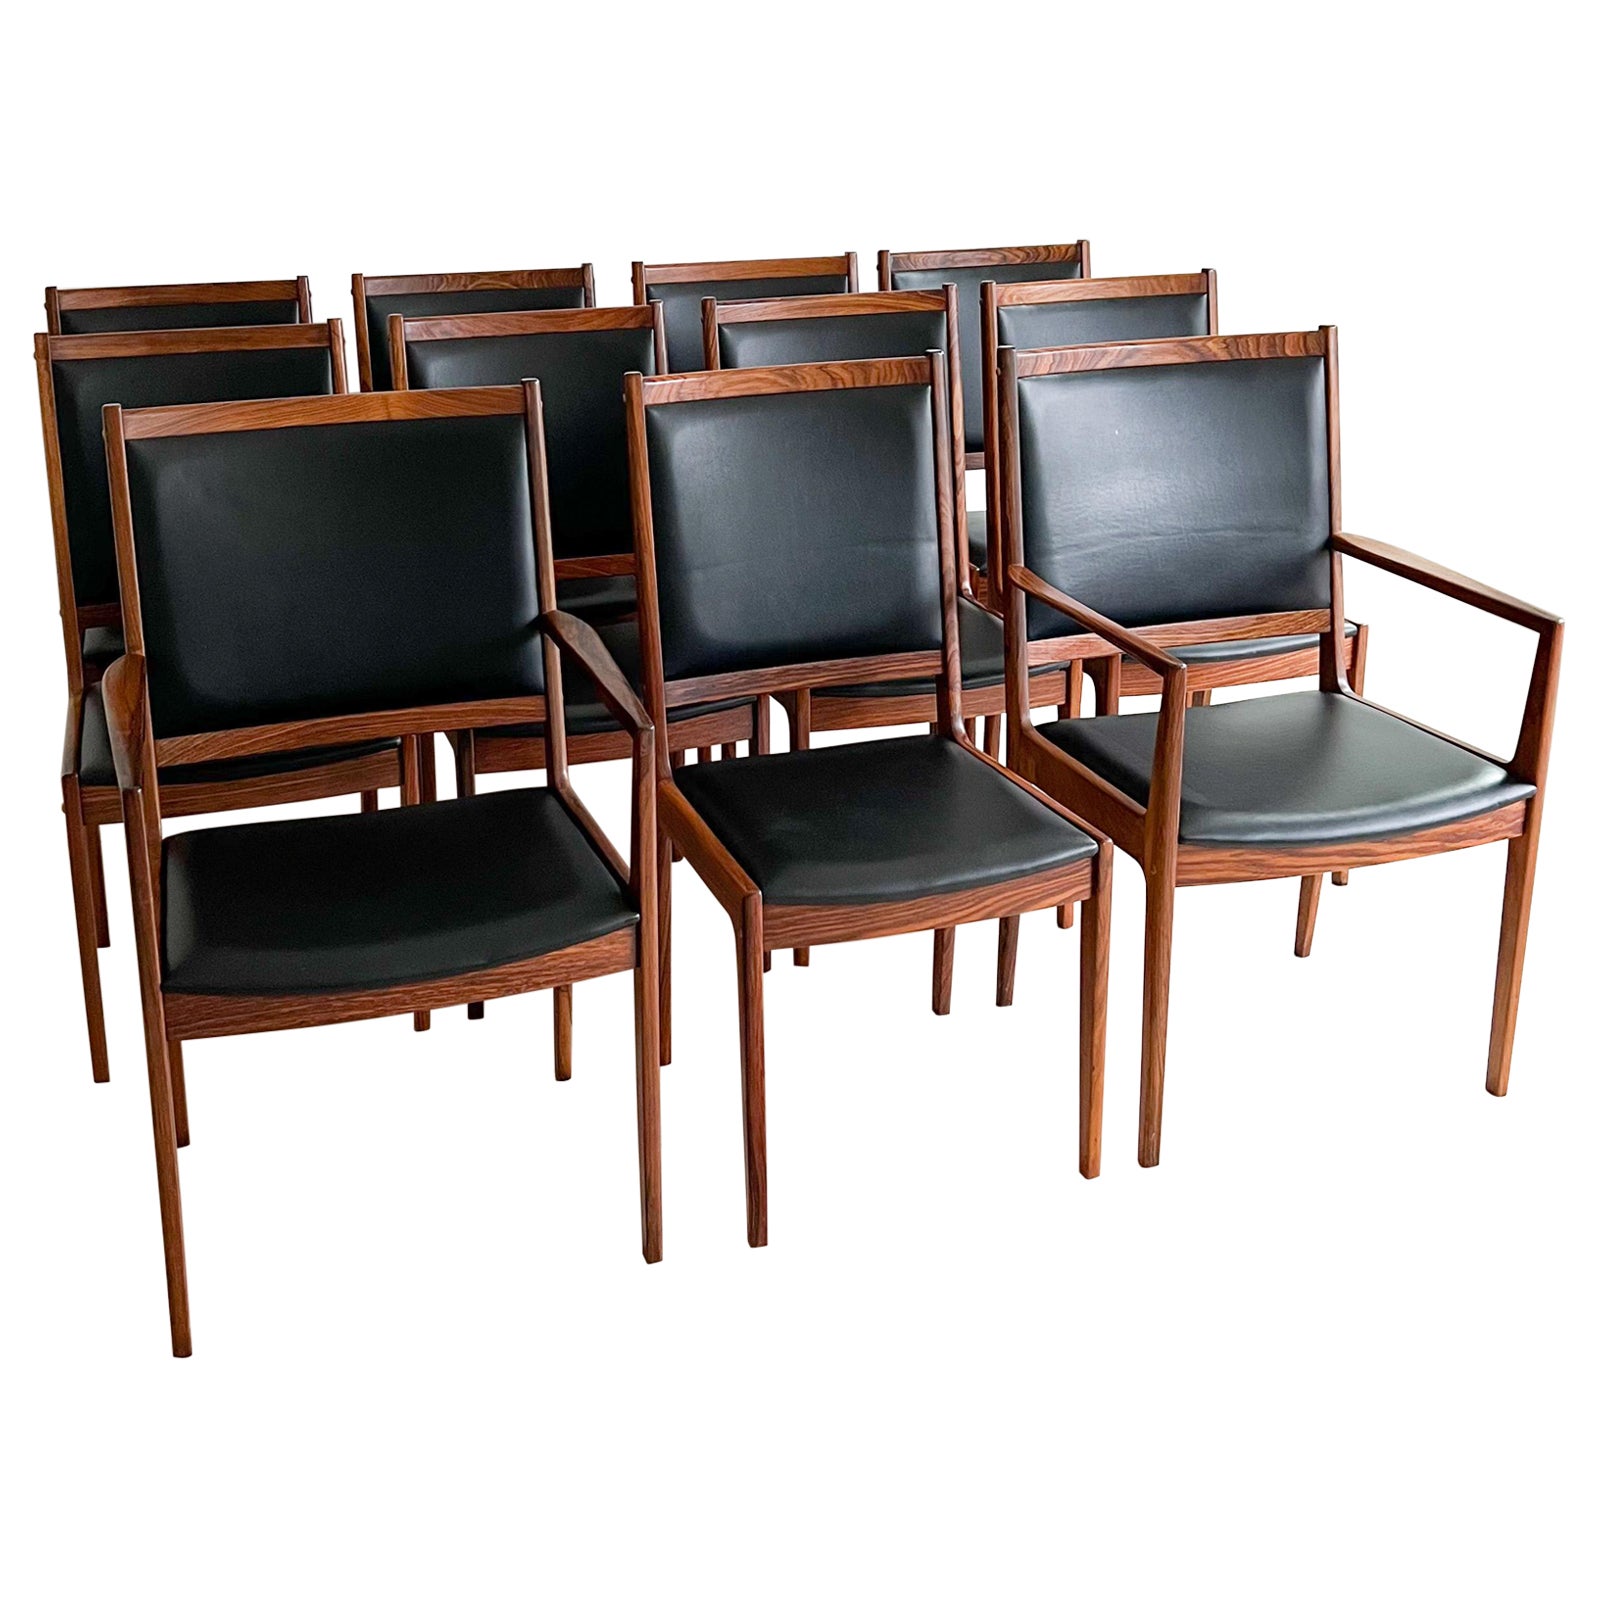 Set of 11 Mid Century Rosewood Dining Chairs by Kofod Larsen